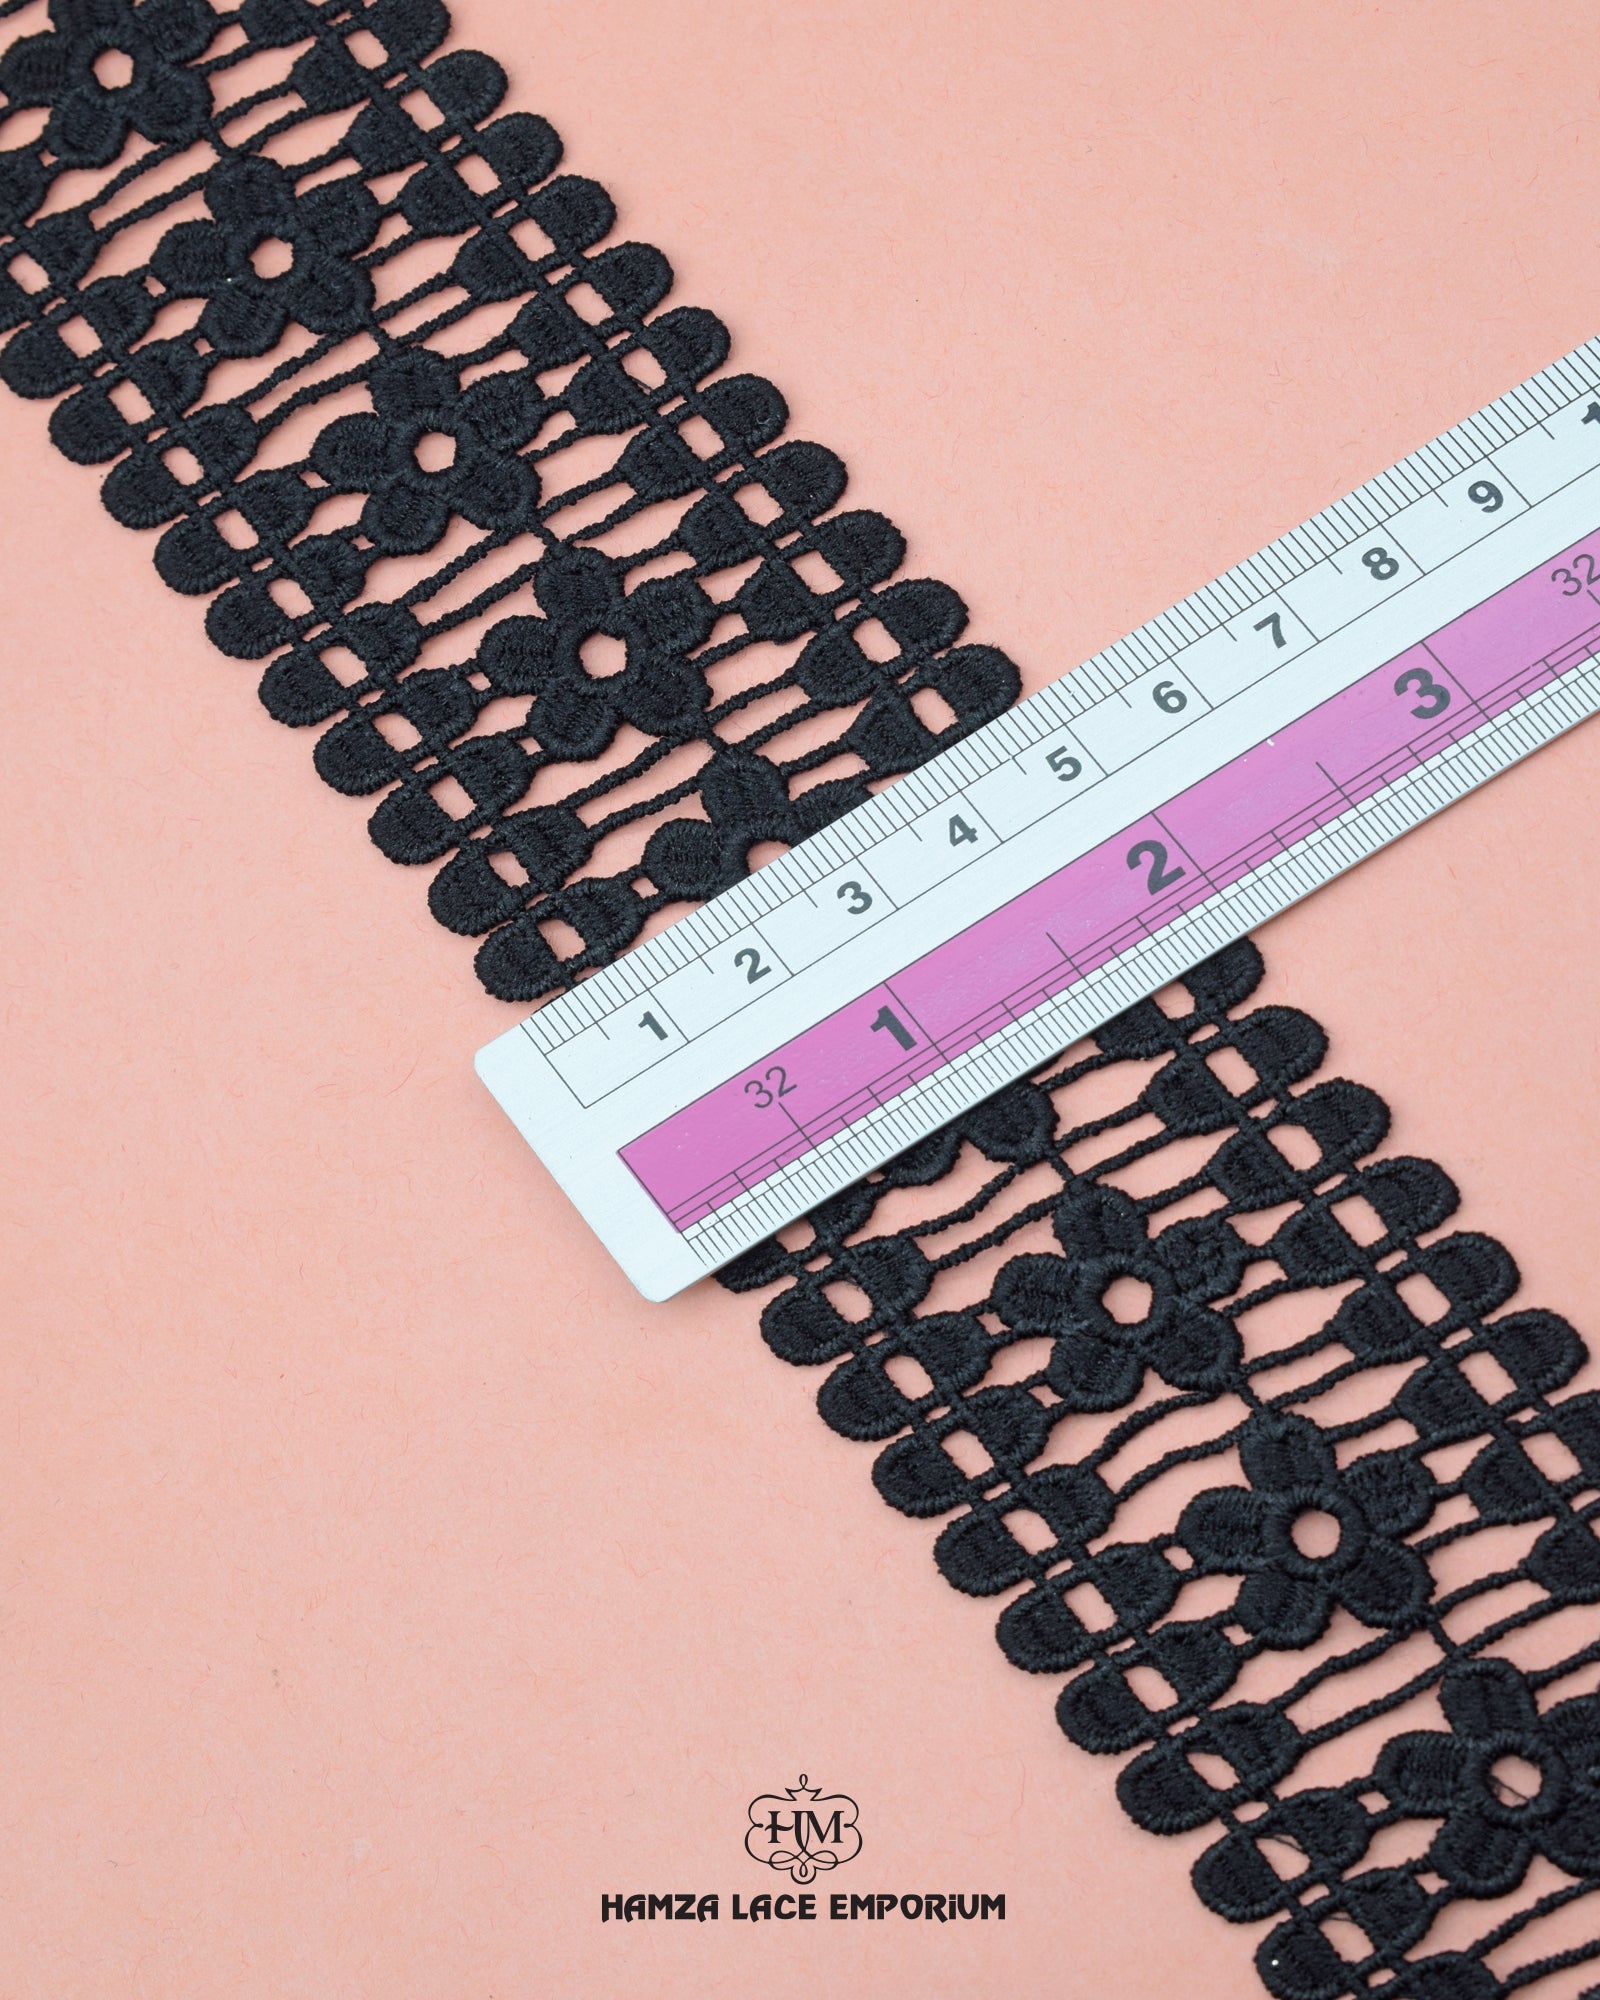 Size of the 'Center Filling Lace 23505' is given as 2 inches with the help of a ruler